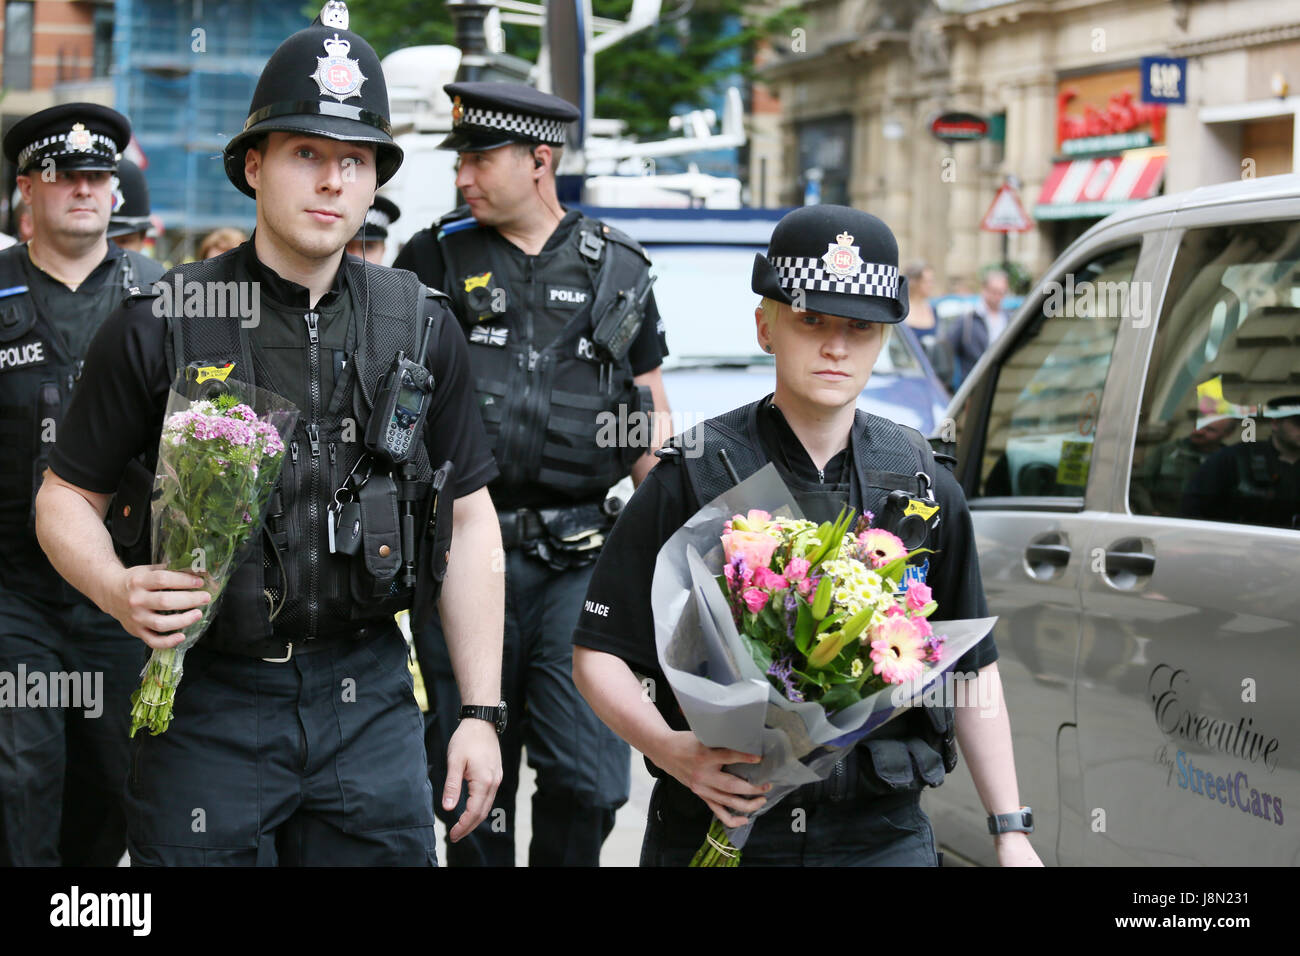 Manchester, UK. 29th May, 2017. Police Officers arrive with flowers to place at floral tribute to bomb victims in St Anns Square, Manchester, 29th May, 2017 Credit: Barbara Cook/Alamy Live News Stock Photo